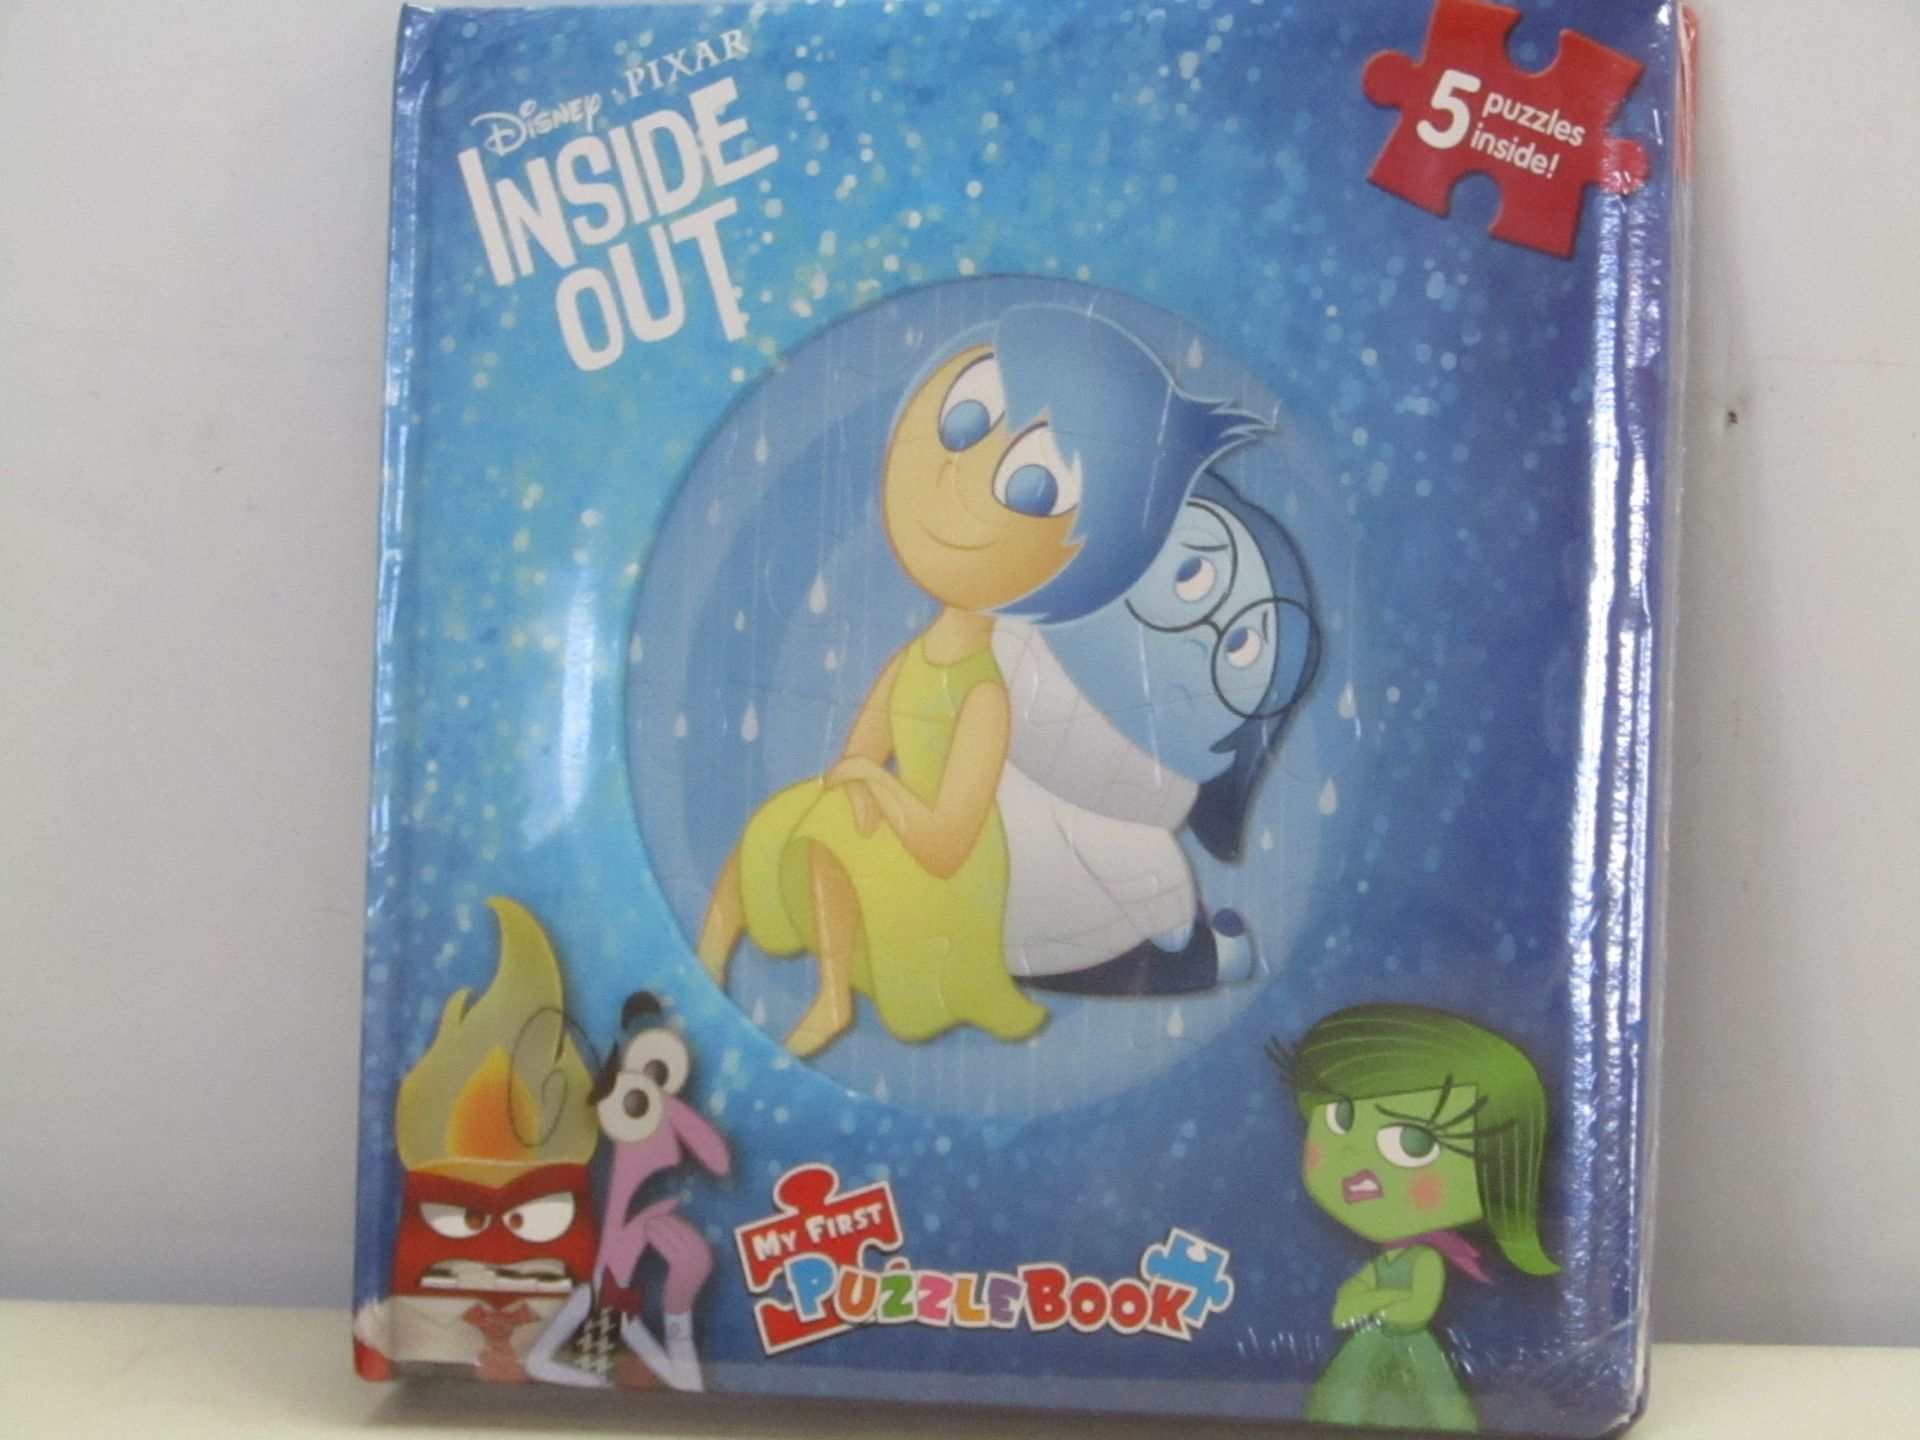 Box containing 12x Disney Pixar Inside Out Puzzle Books. New and boxed.